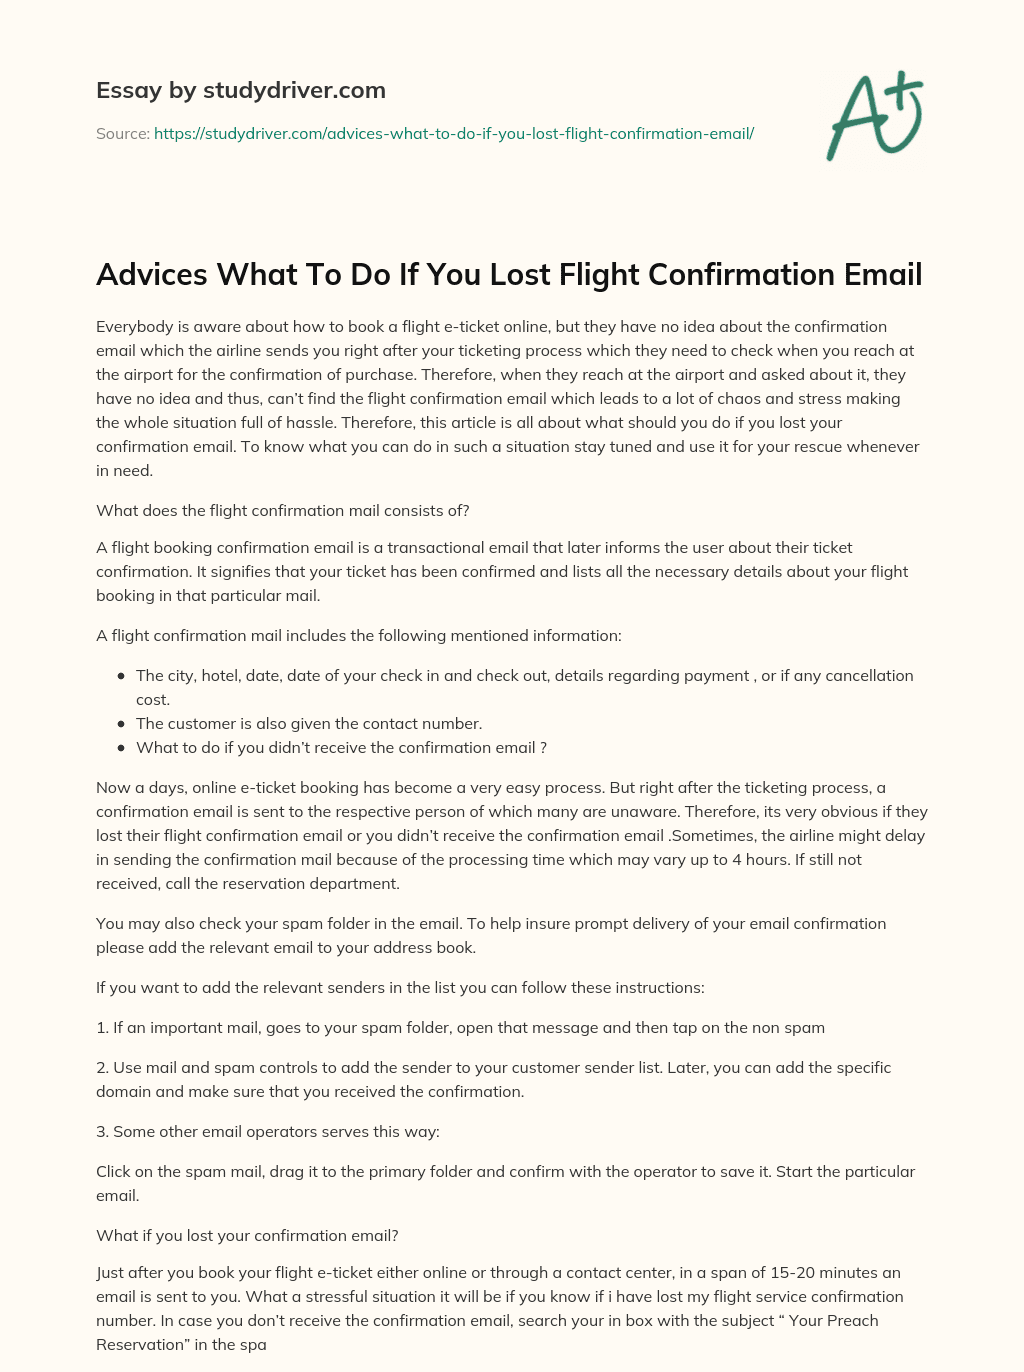 Advices what to do if you Lost Flight Confirmation Email essay